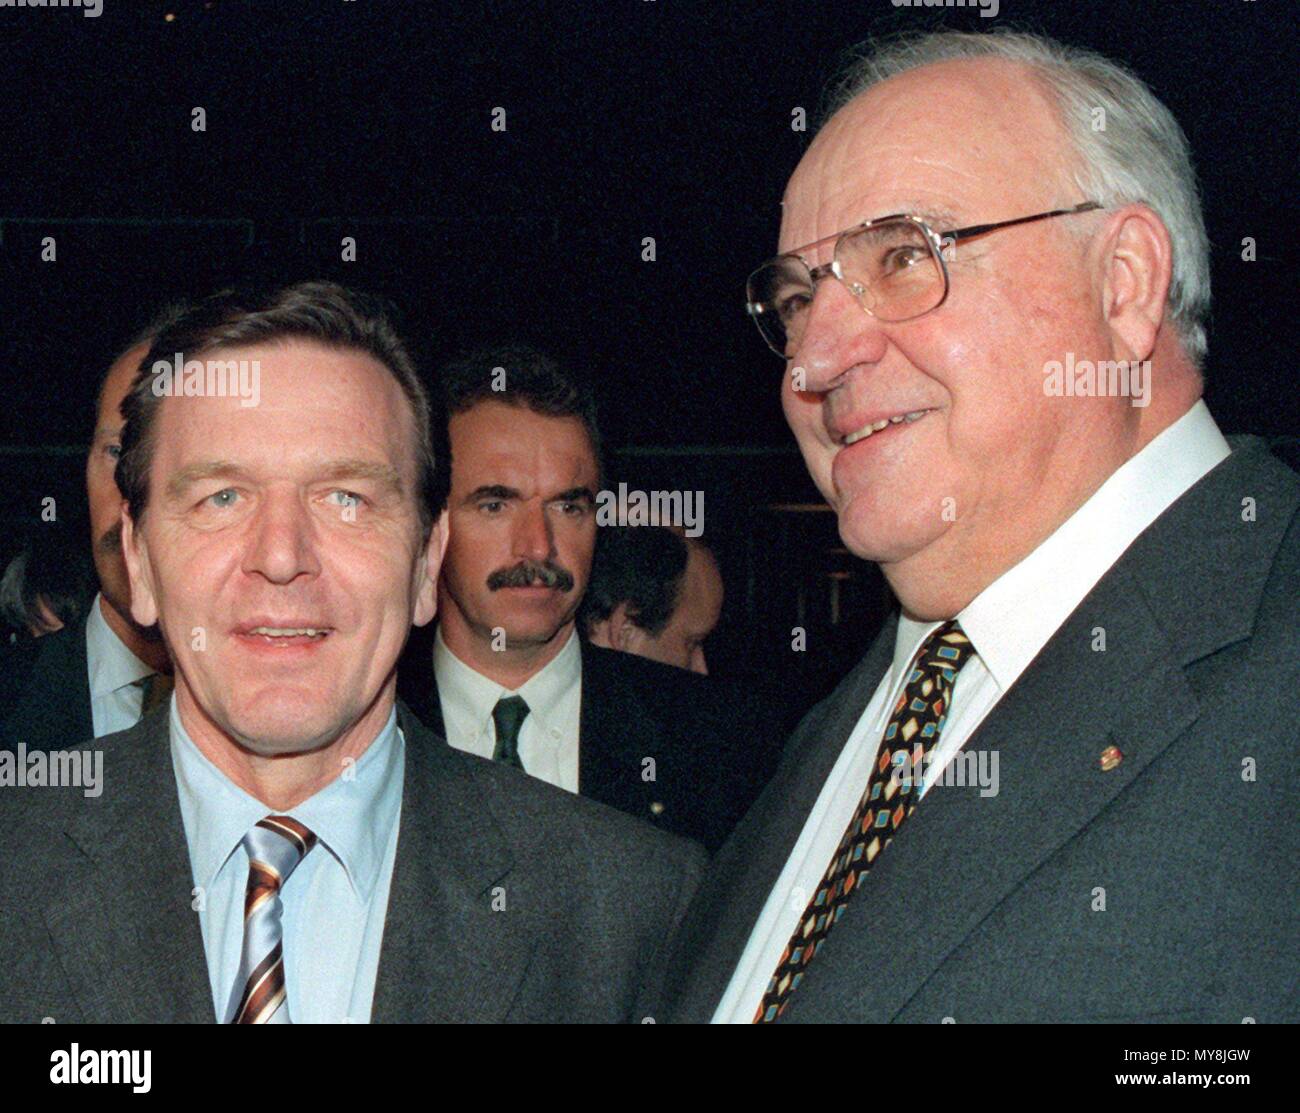 German Chancellor Helmut Kohl (r) and Premier of Lower Saxony Gerhard  Schroeder at the opening of the CeBIT computer expo in Hanover, Germany, on  18 March 1998. | usage worldwide Stock Photo - Alamy